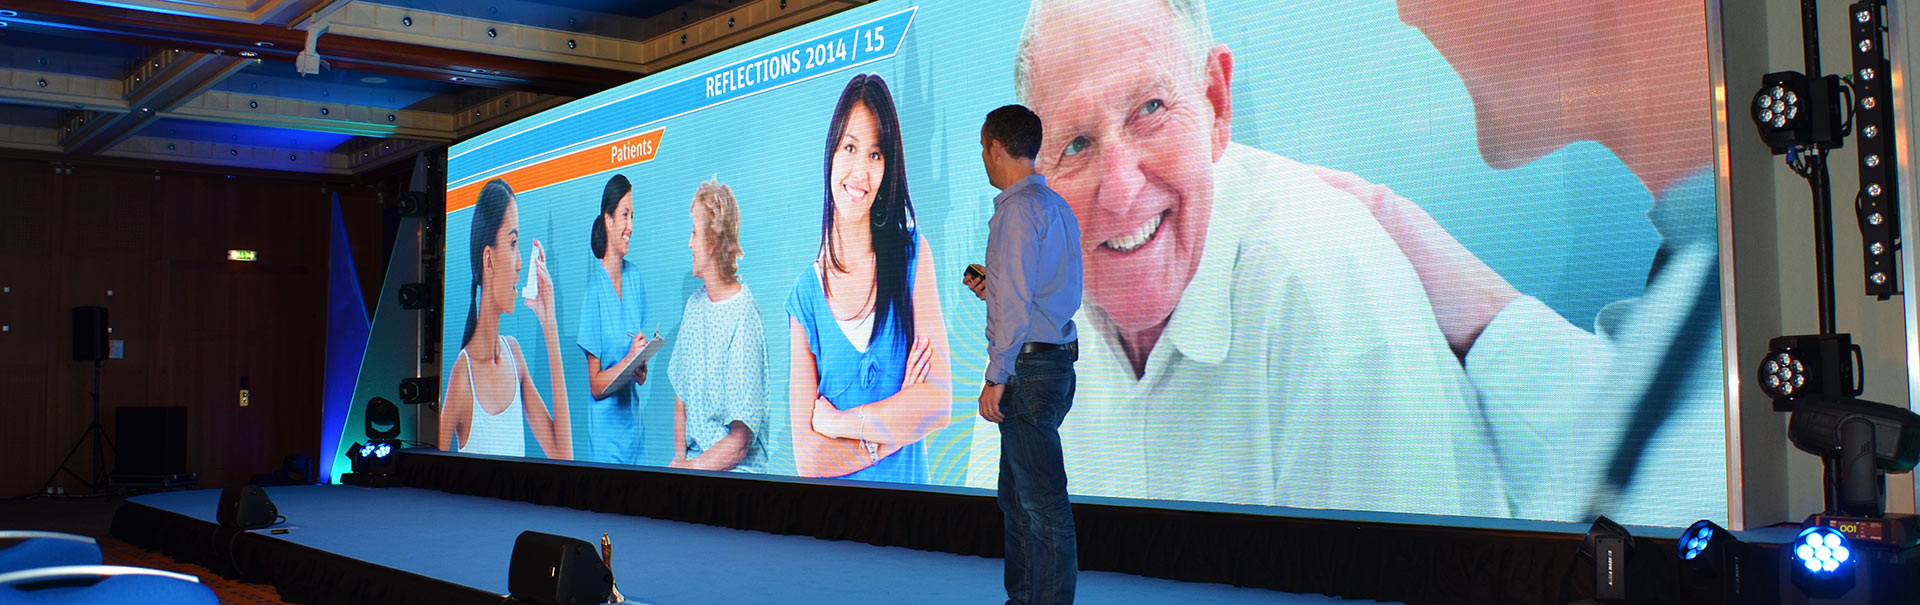 Conference LED Screen hire